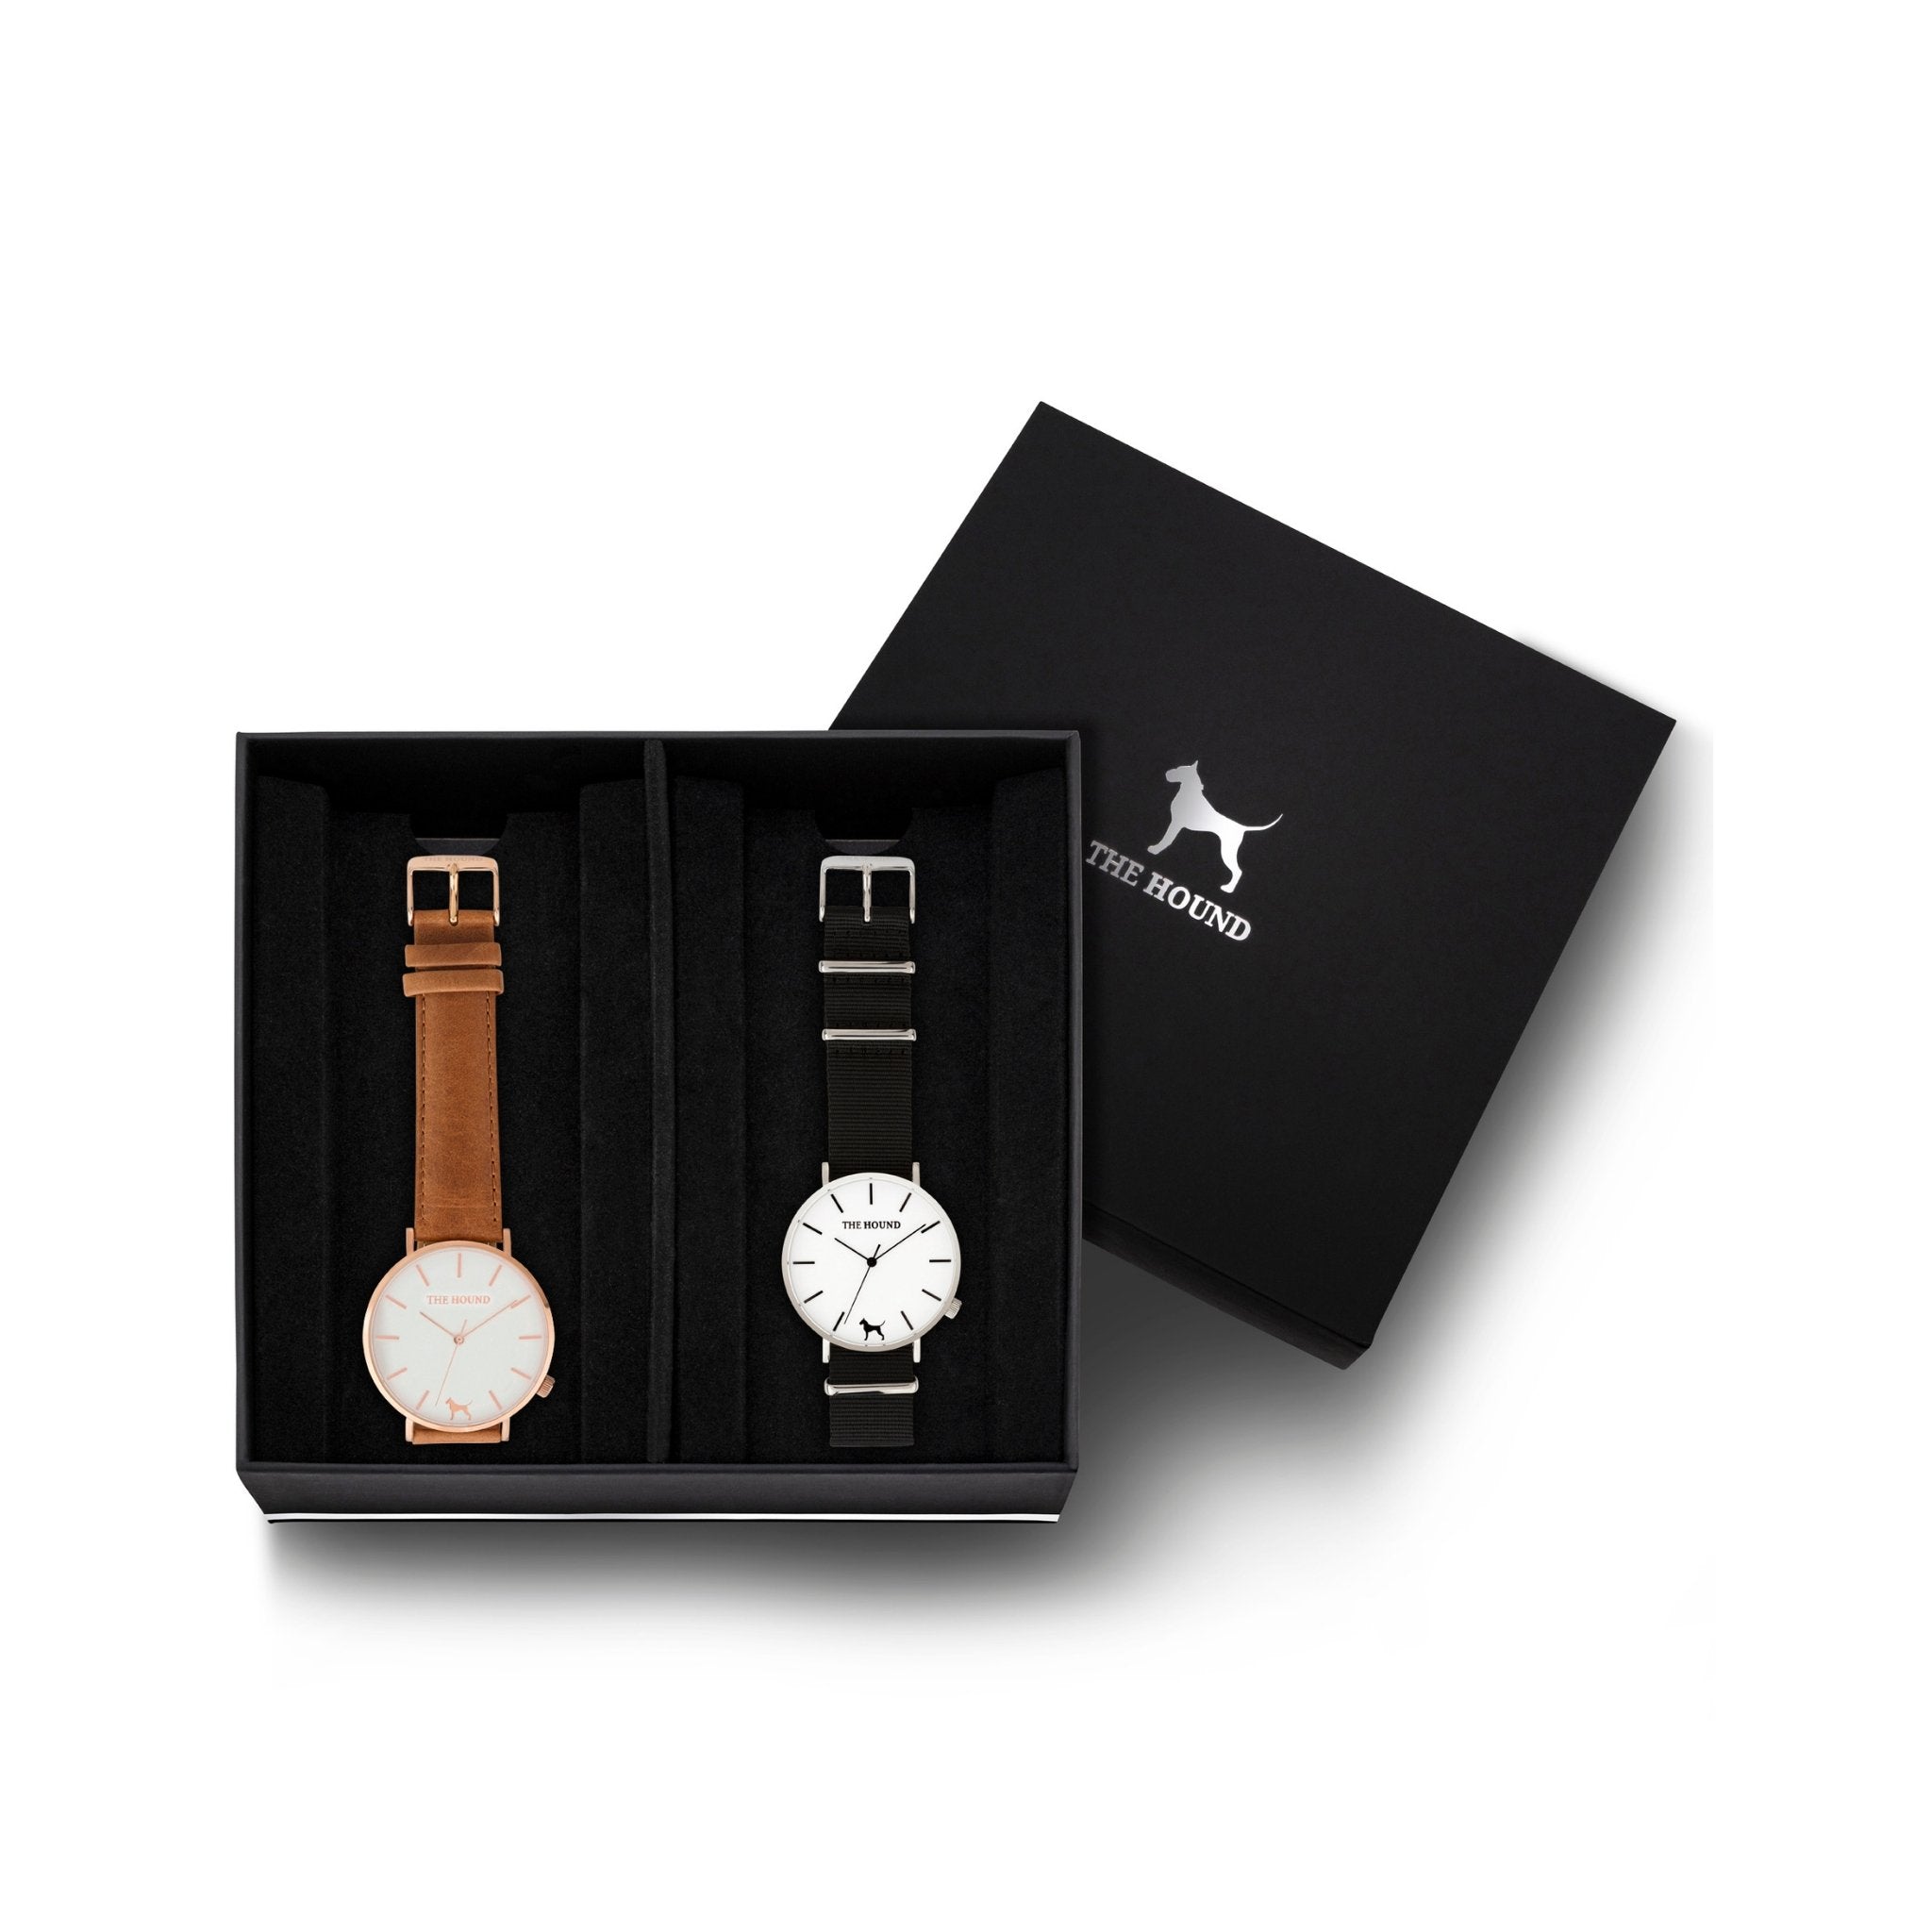 Custom gift set - Rose gold and white watch with stitched tan genuine leather band and a silver and white watch with black nato leather band